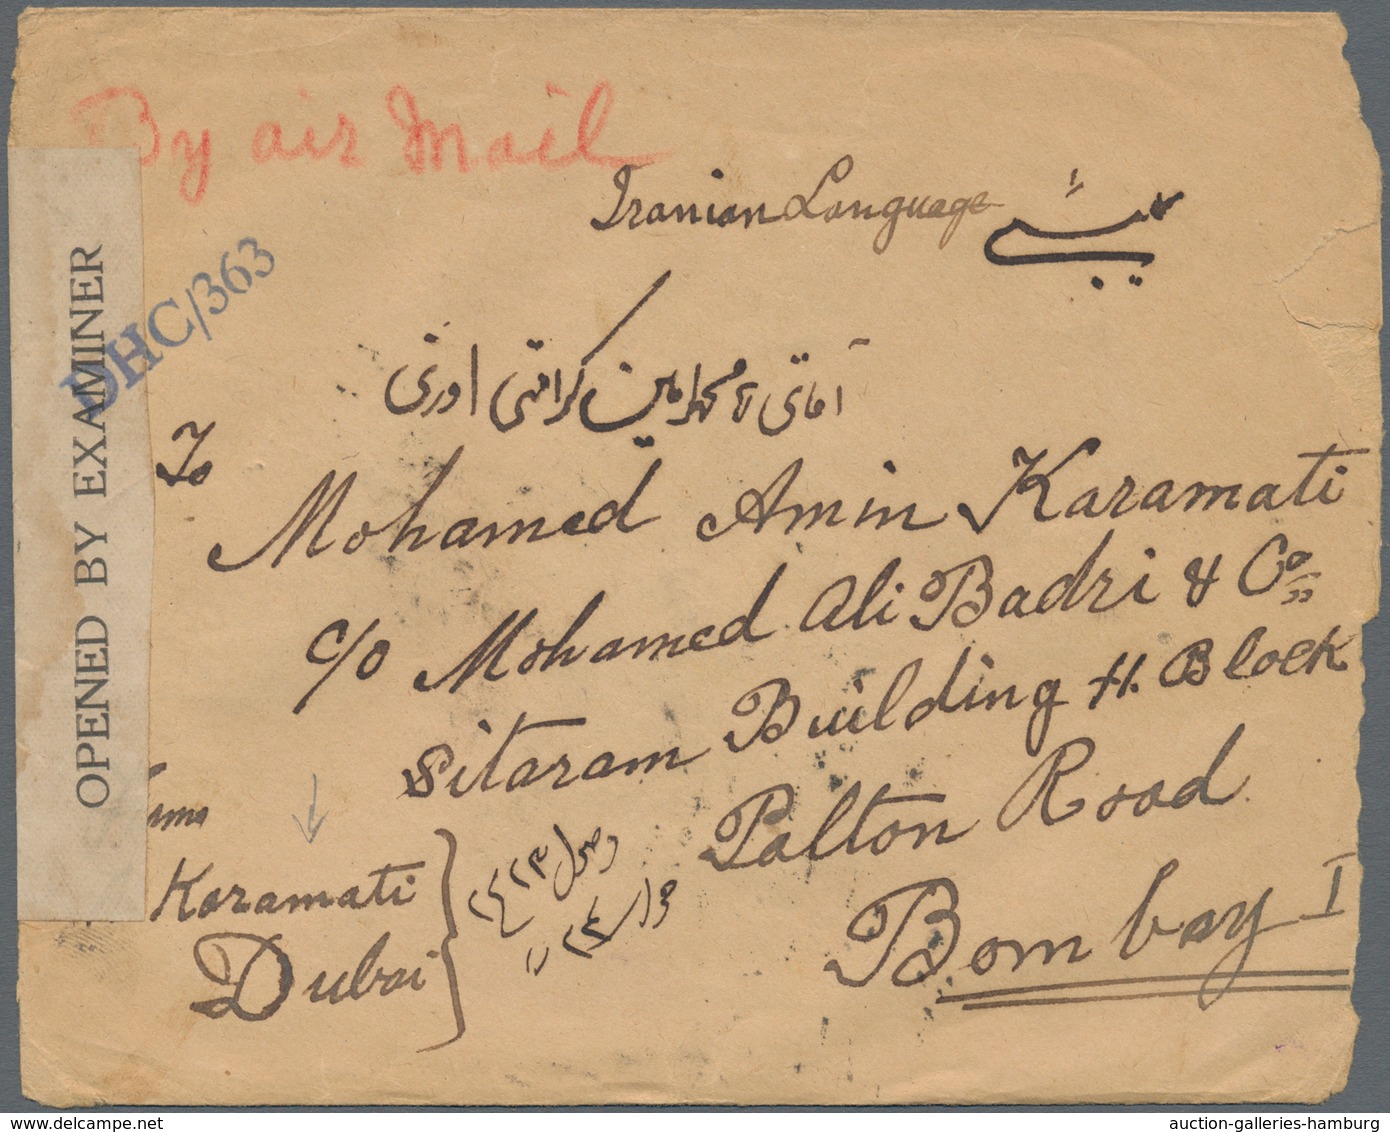 Dubai: 1940, 2 As. 6 P. Violet Single On Cover Tied By "DUBAI" Cds., Red Crayon Ms. "by Air Mail" An - Dubai